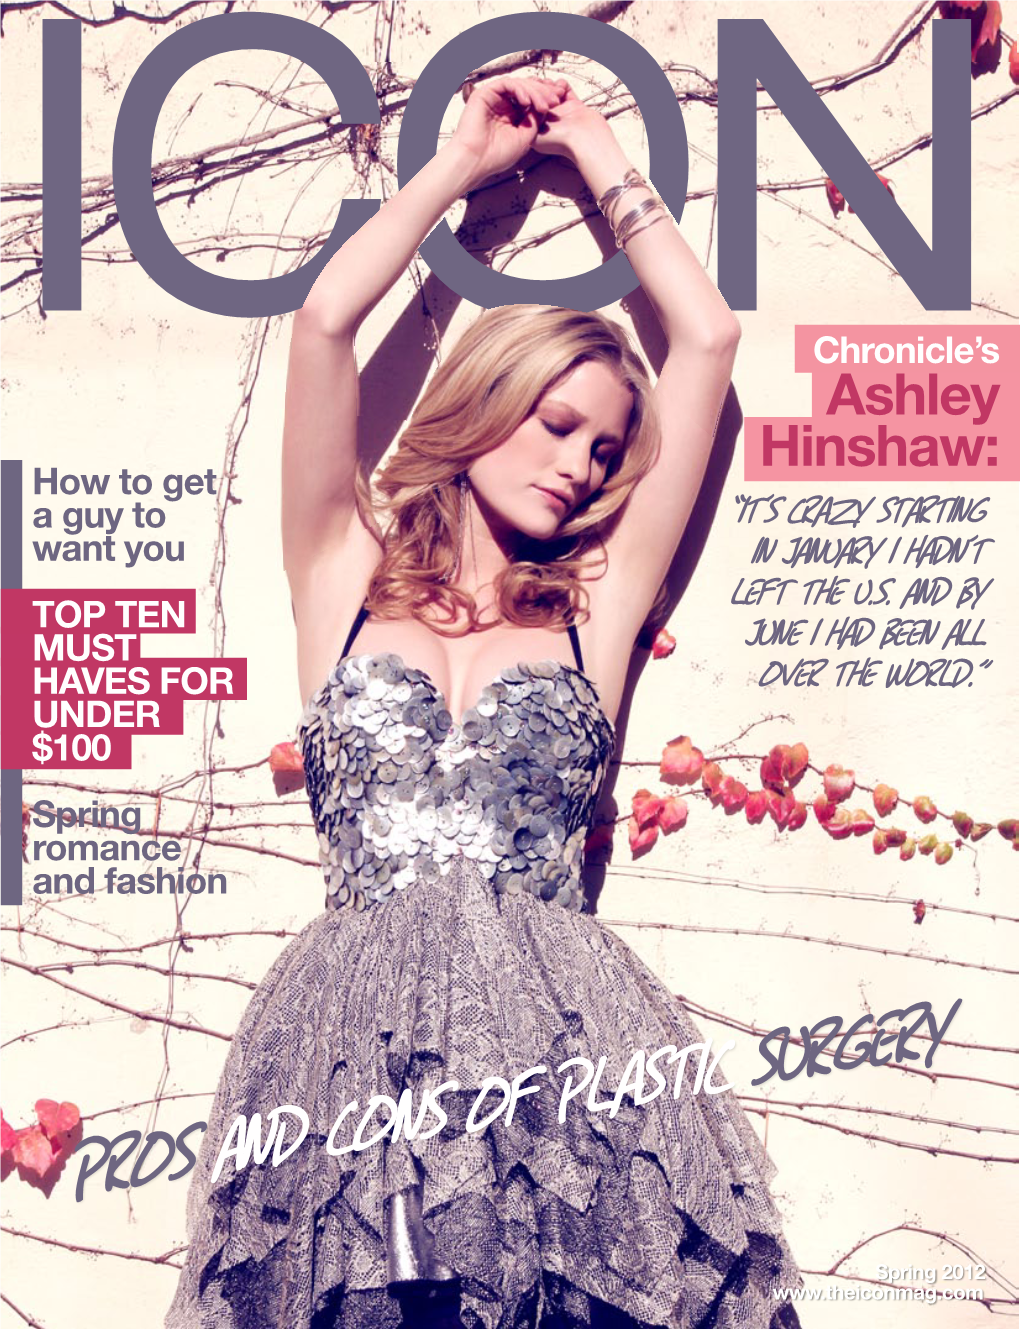 Ashley Hinshaw: How to Get a Guy to “It’S Crazy Starting Want You in January I Hadn’T Left the U.S